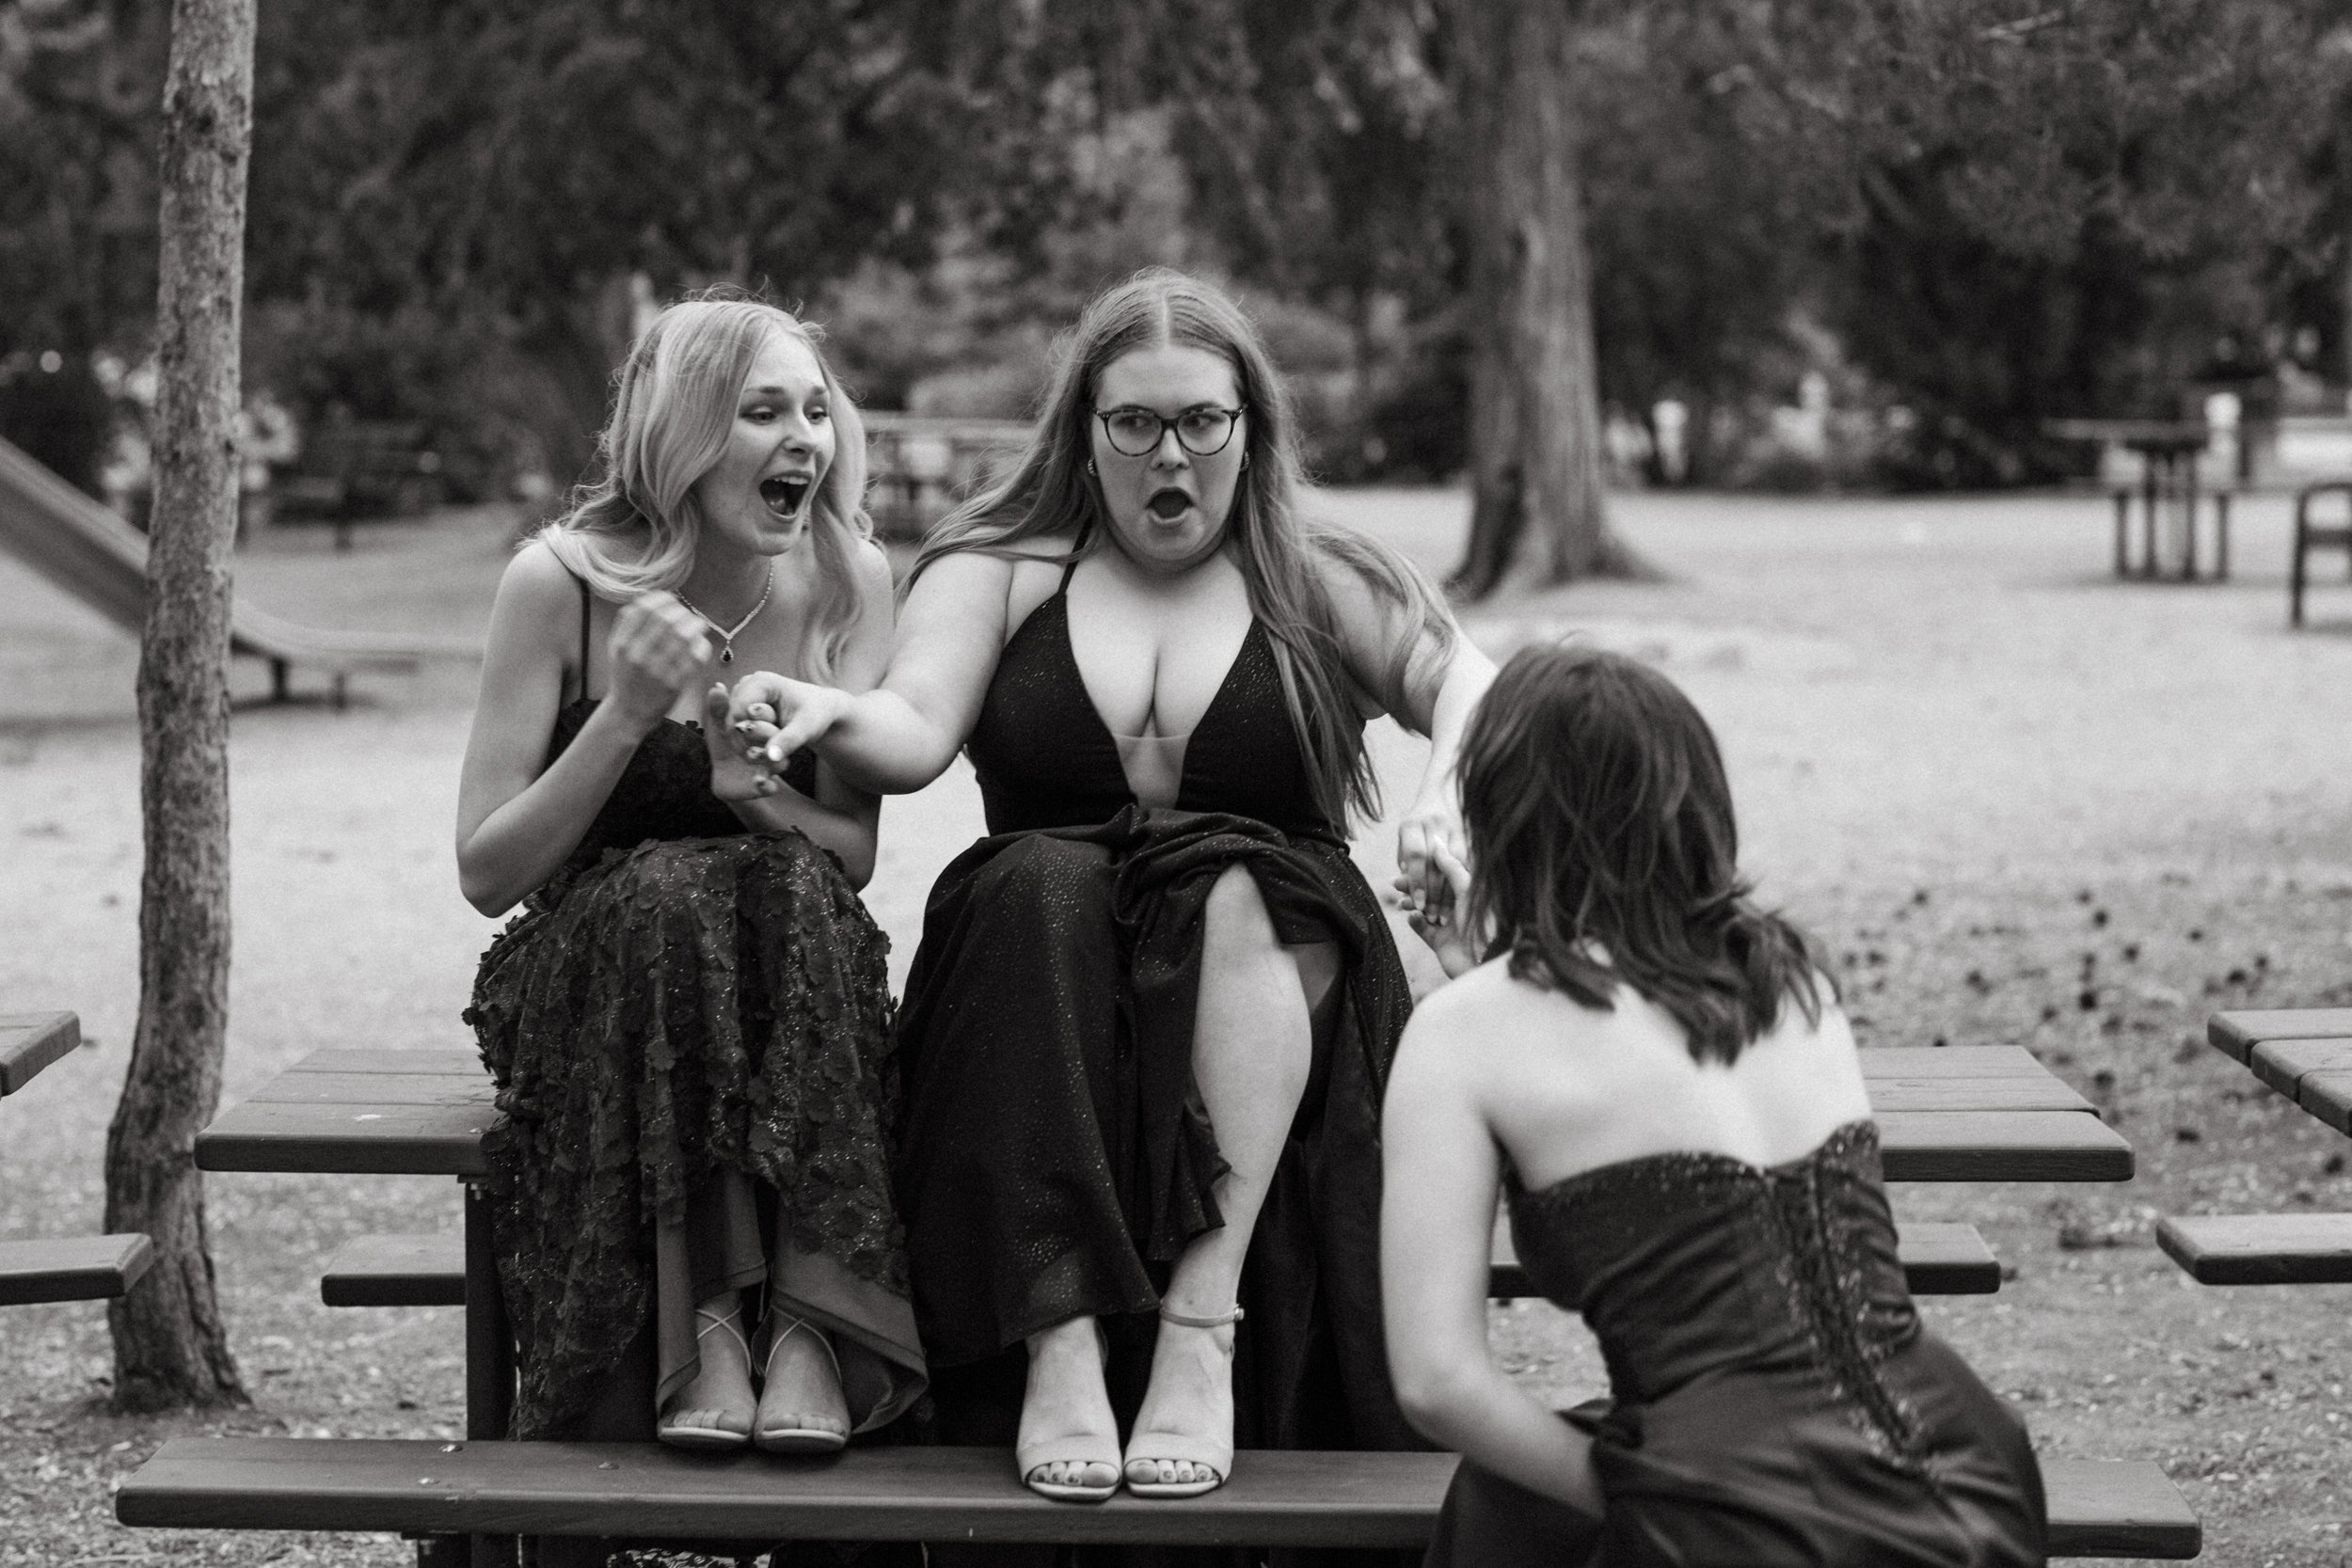  black and white photo of two girls in grad dresses sit on picnic table while the thrid is down on one knee pretending to propose to the middle girl her shocked face a funny sight 